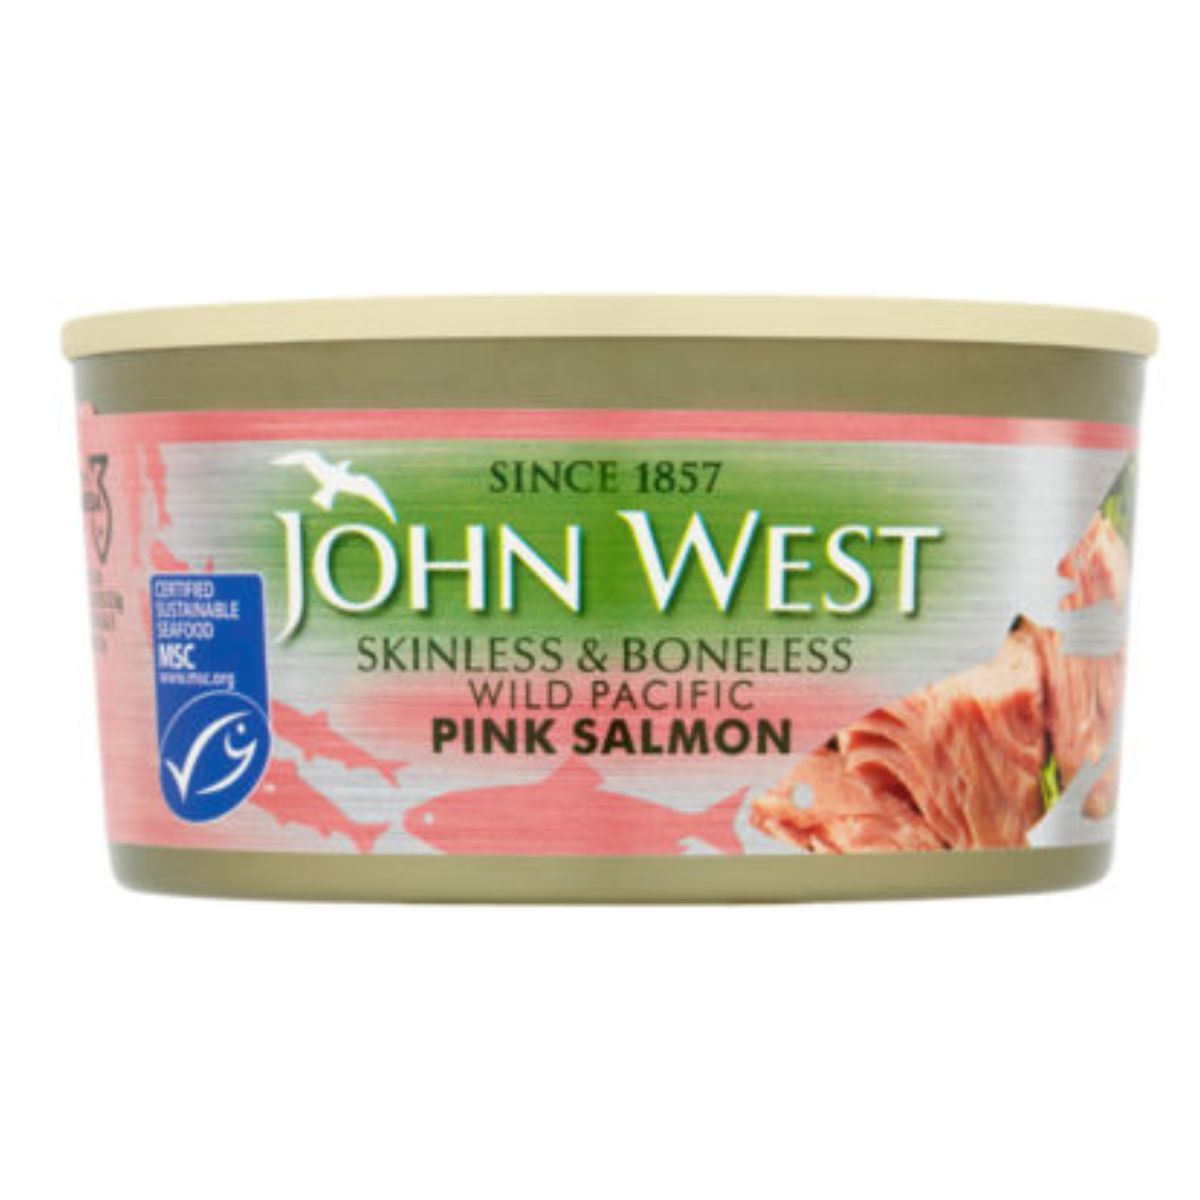 John West - Skinless & Boneless Wild Pacific Pink Salmon - 170g canned cat food.